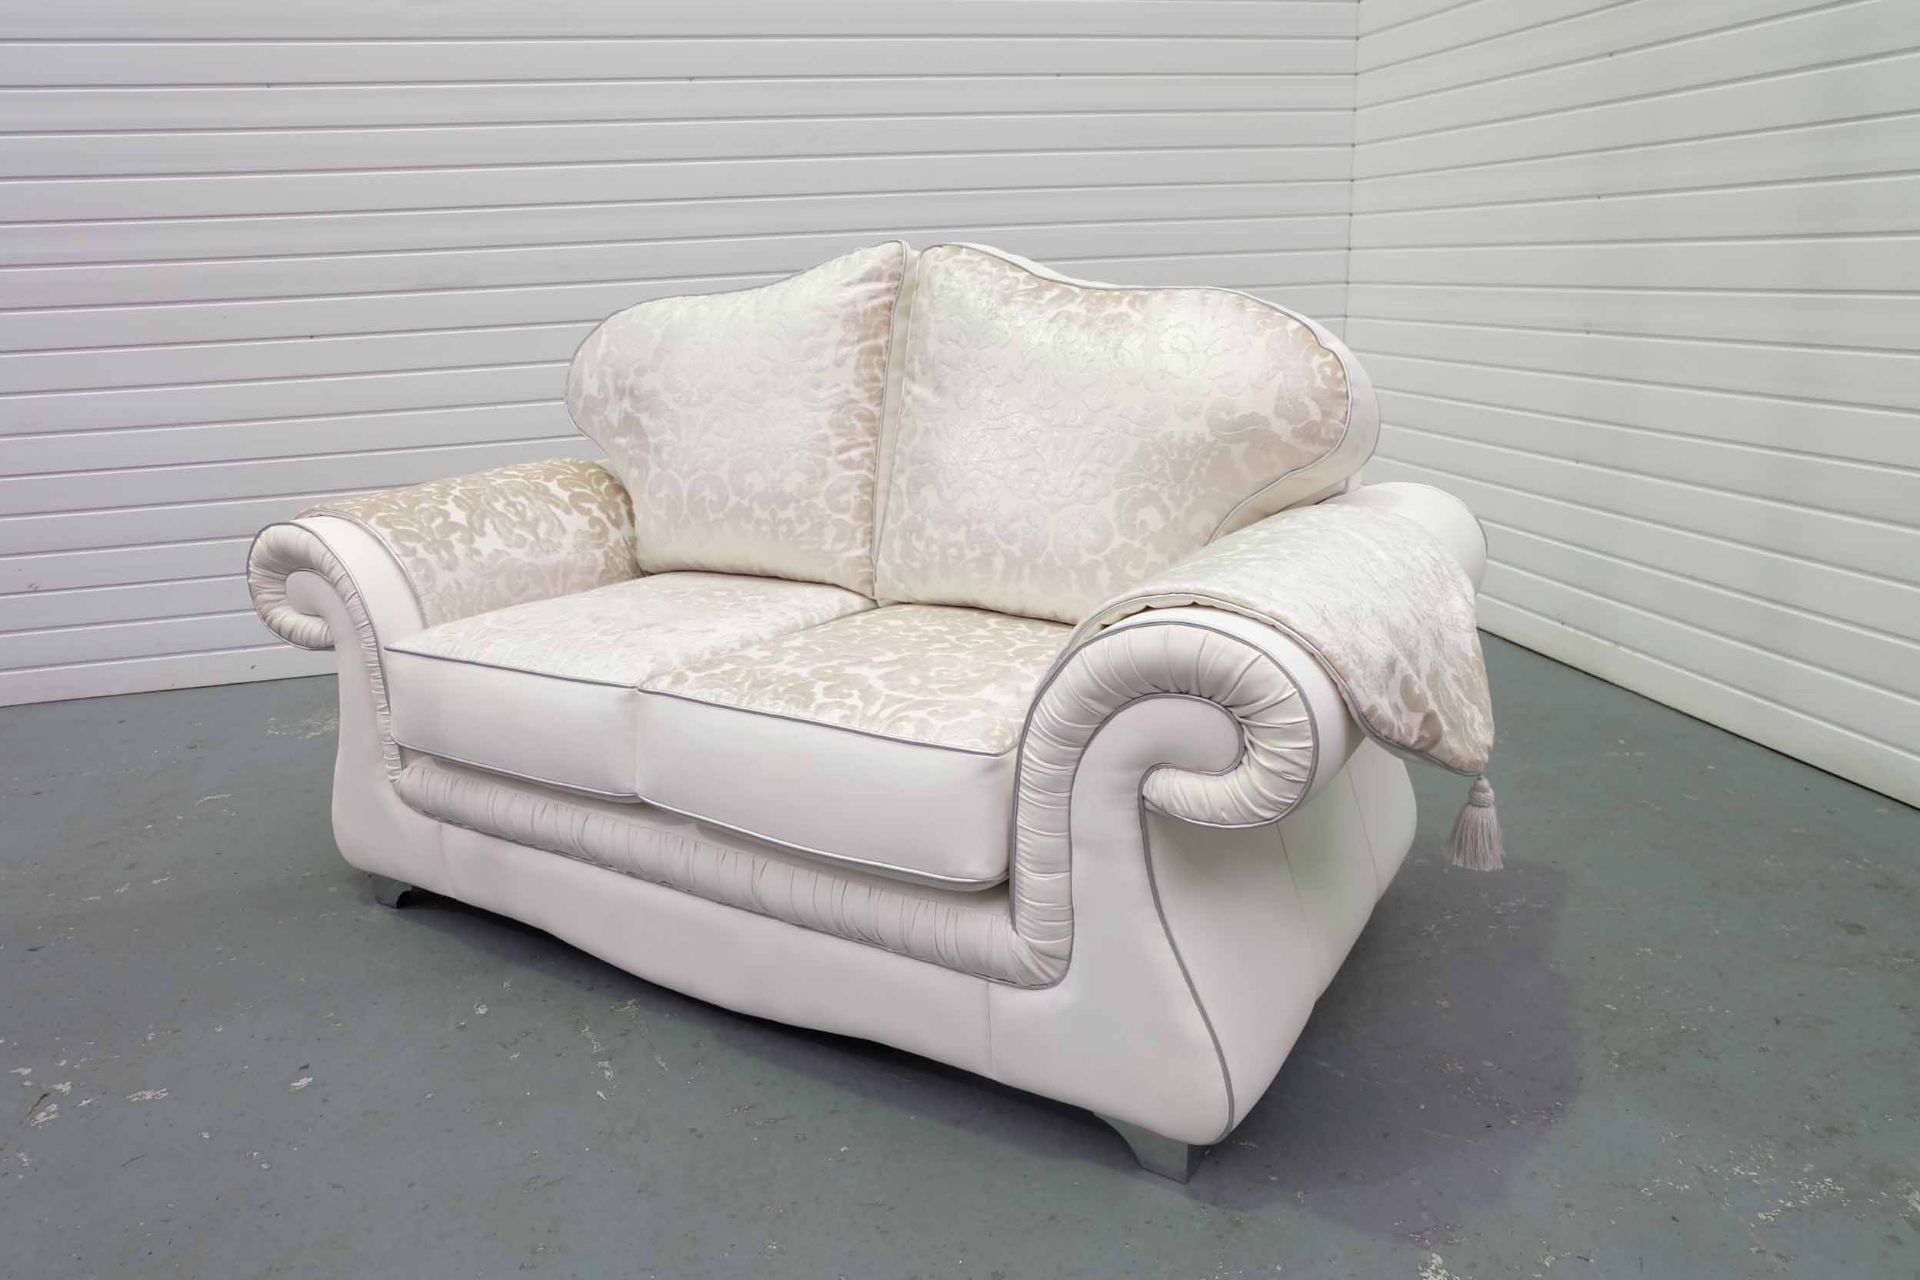 Handmade Collection 2 Seater Sofa. With Arm Throws. - Image 2 of 8